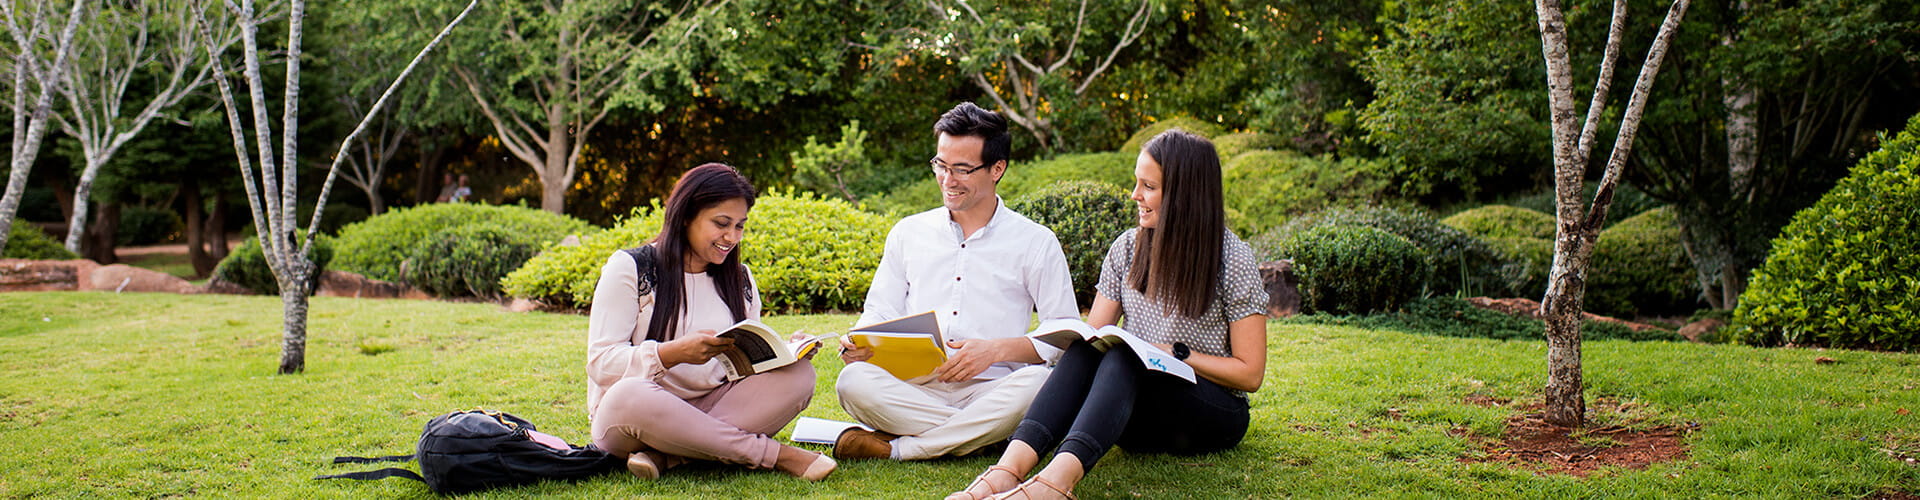 Three people reading books together in a park setting.